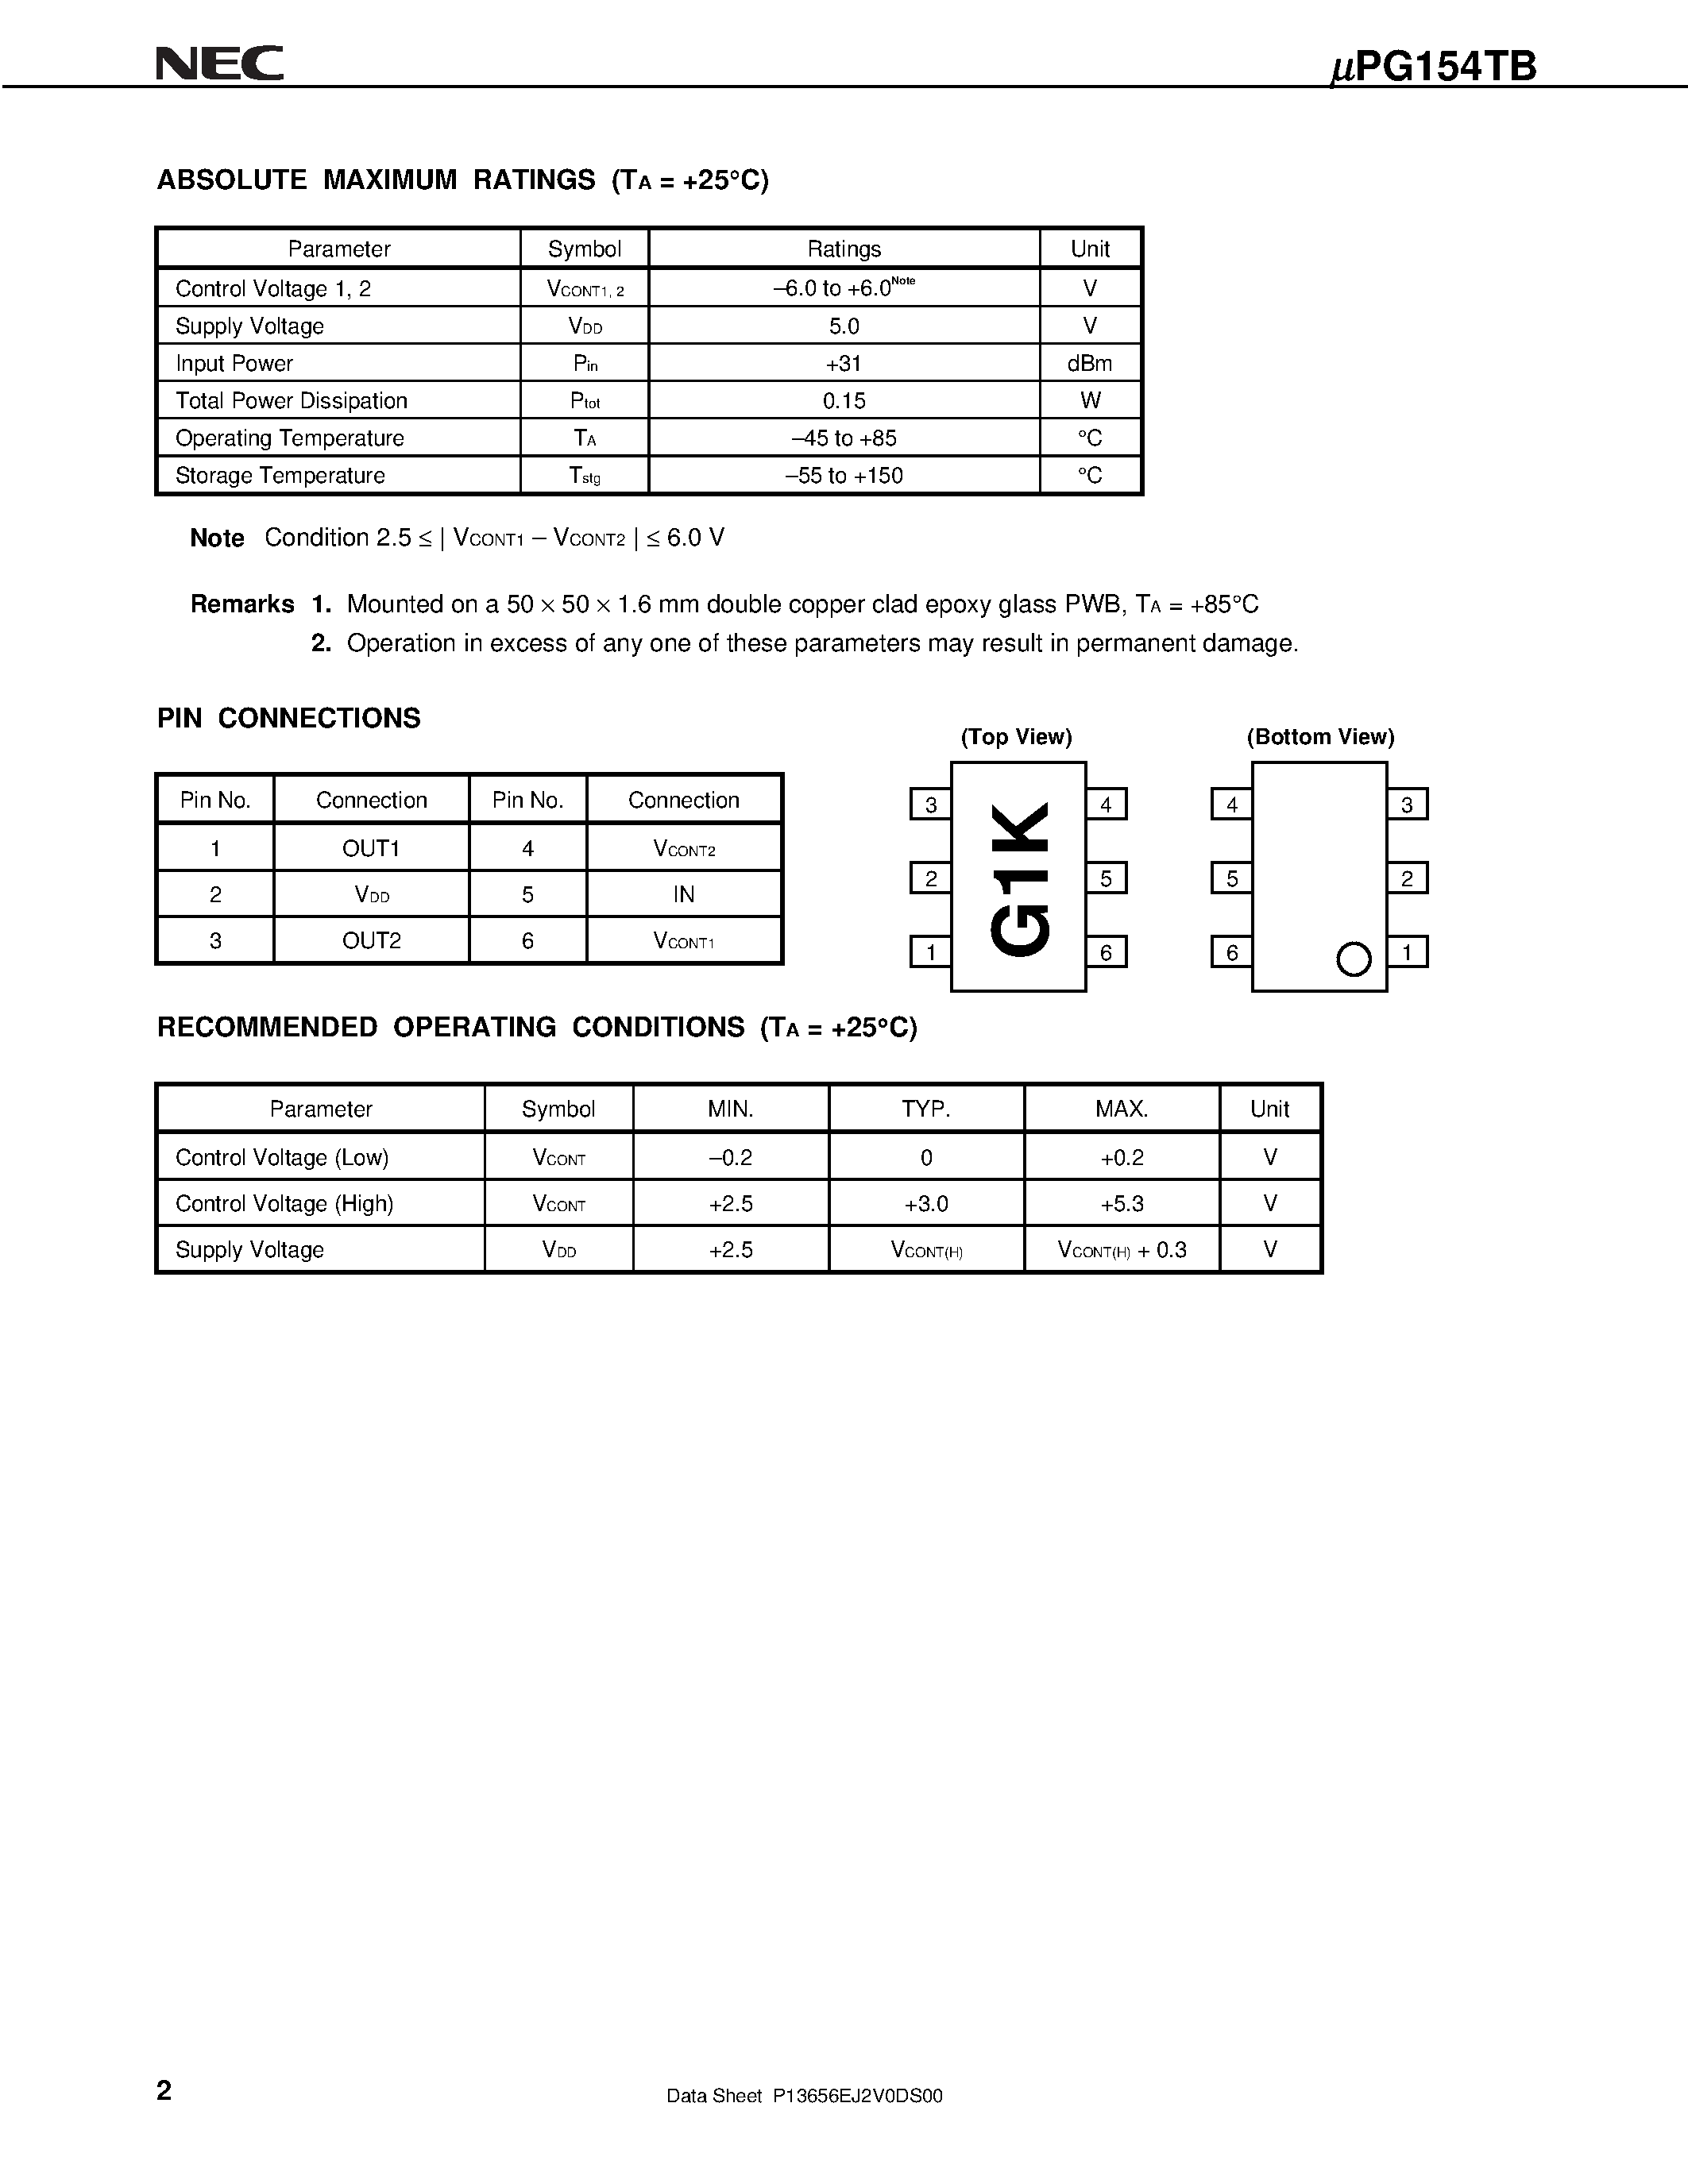 Datasheet UPG154 - L-BAND SPDT SWITCH page 2